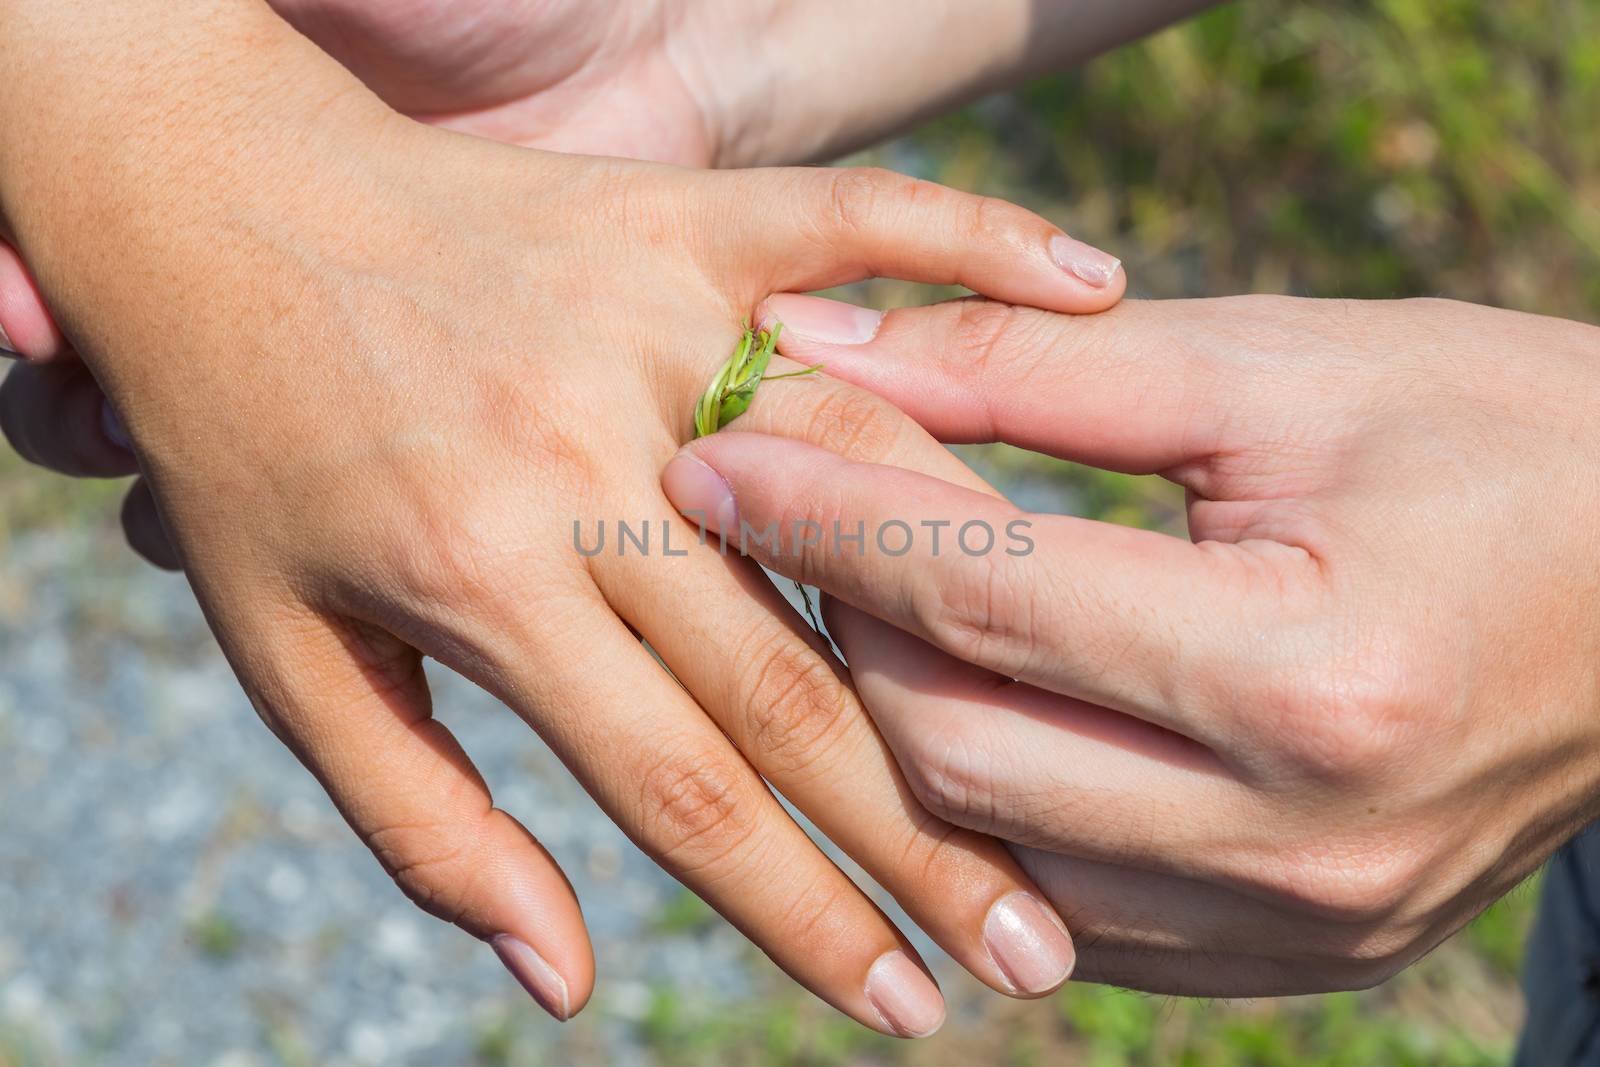 Groom Wearing an engagement or wedding ring made from grass to bride with love